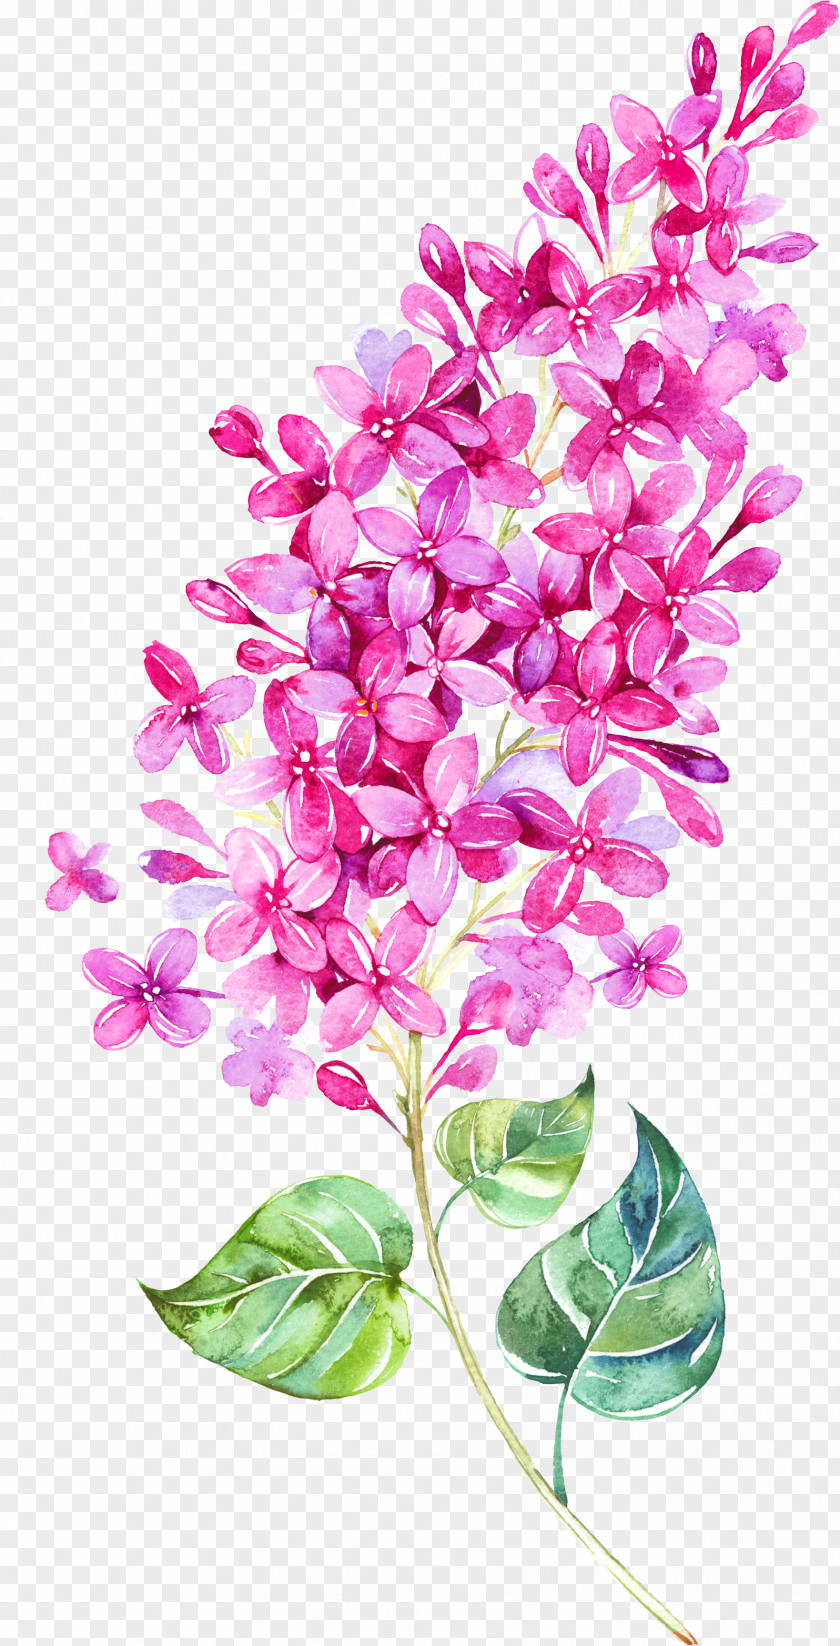 Floating Flower Watercolor Painting Clip Art PNG